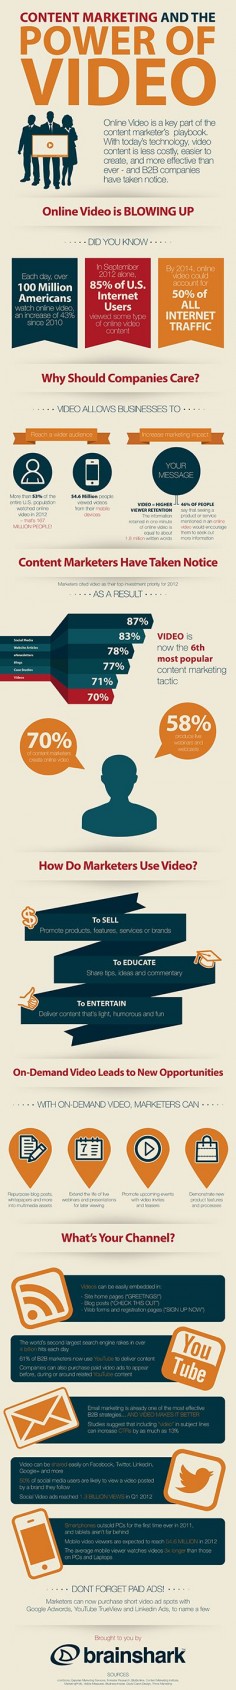 Content marketing the power of video #content #video